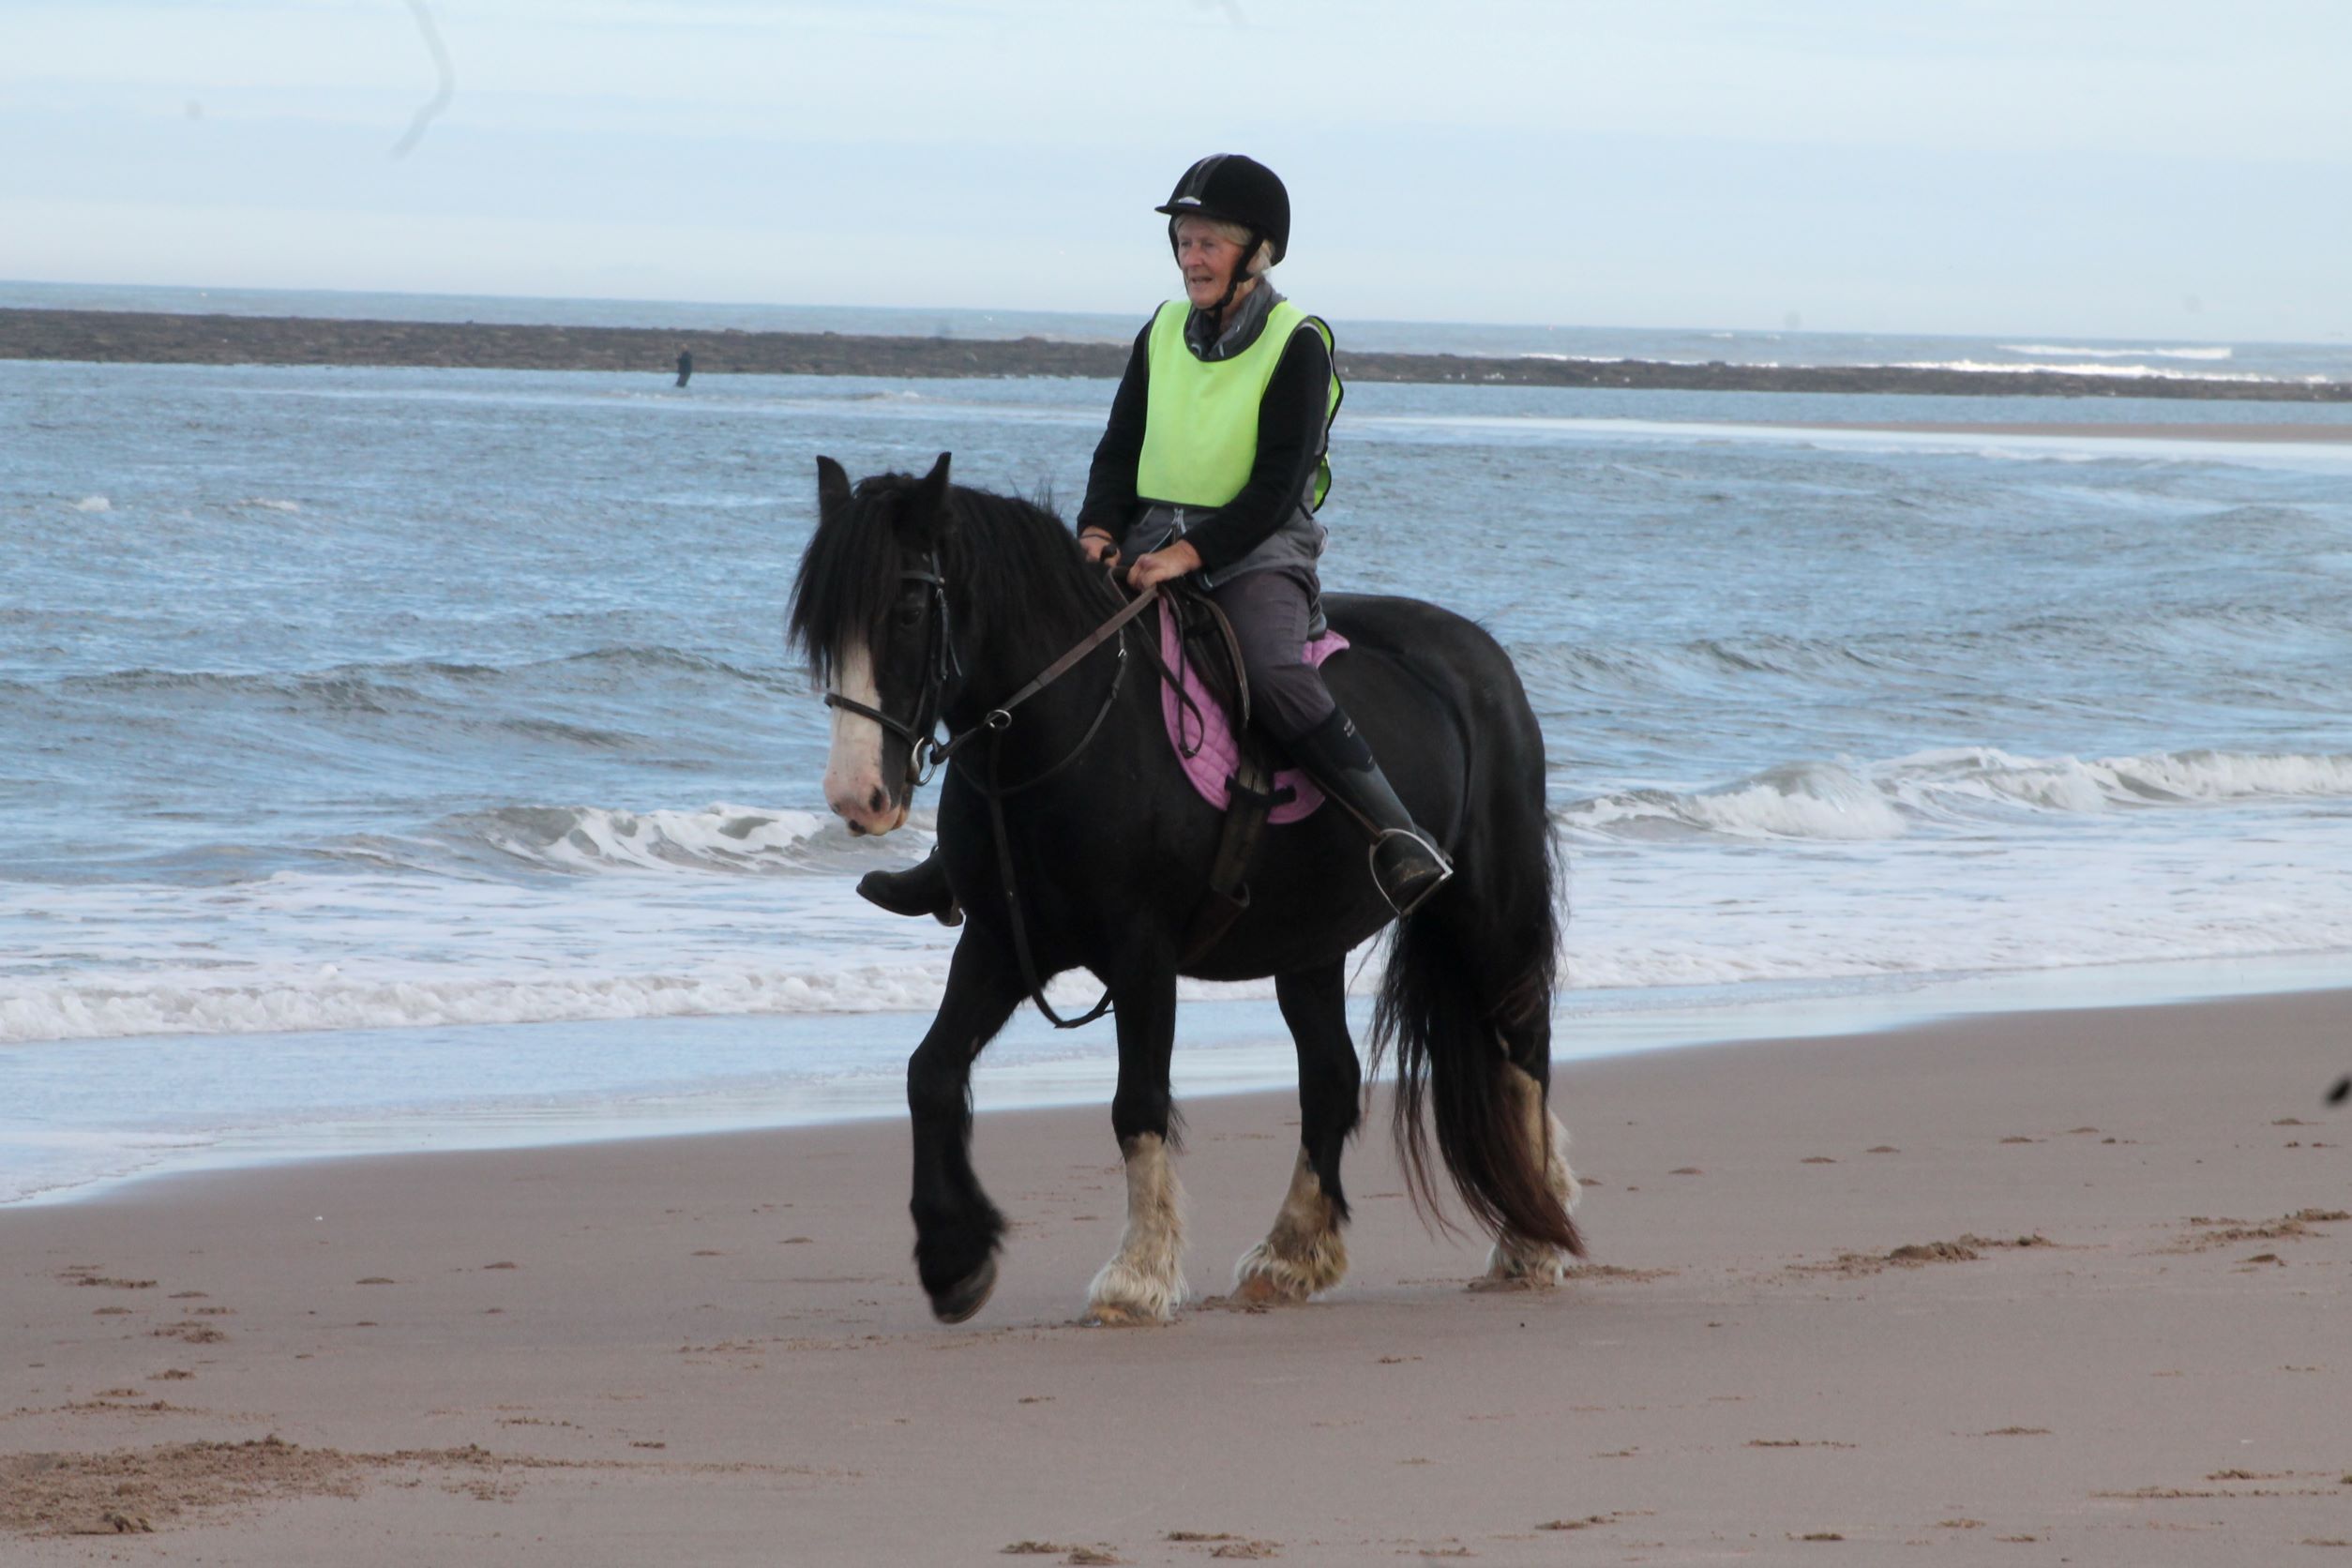 Horseriding in the waves